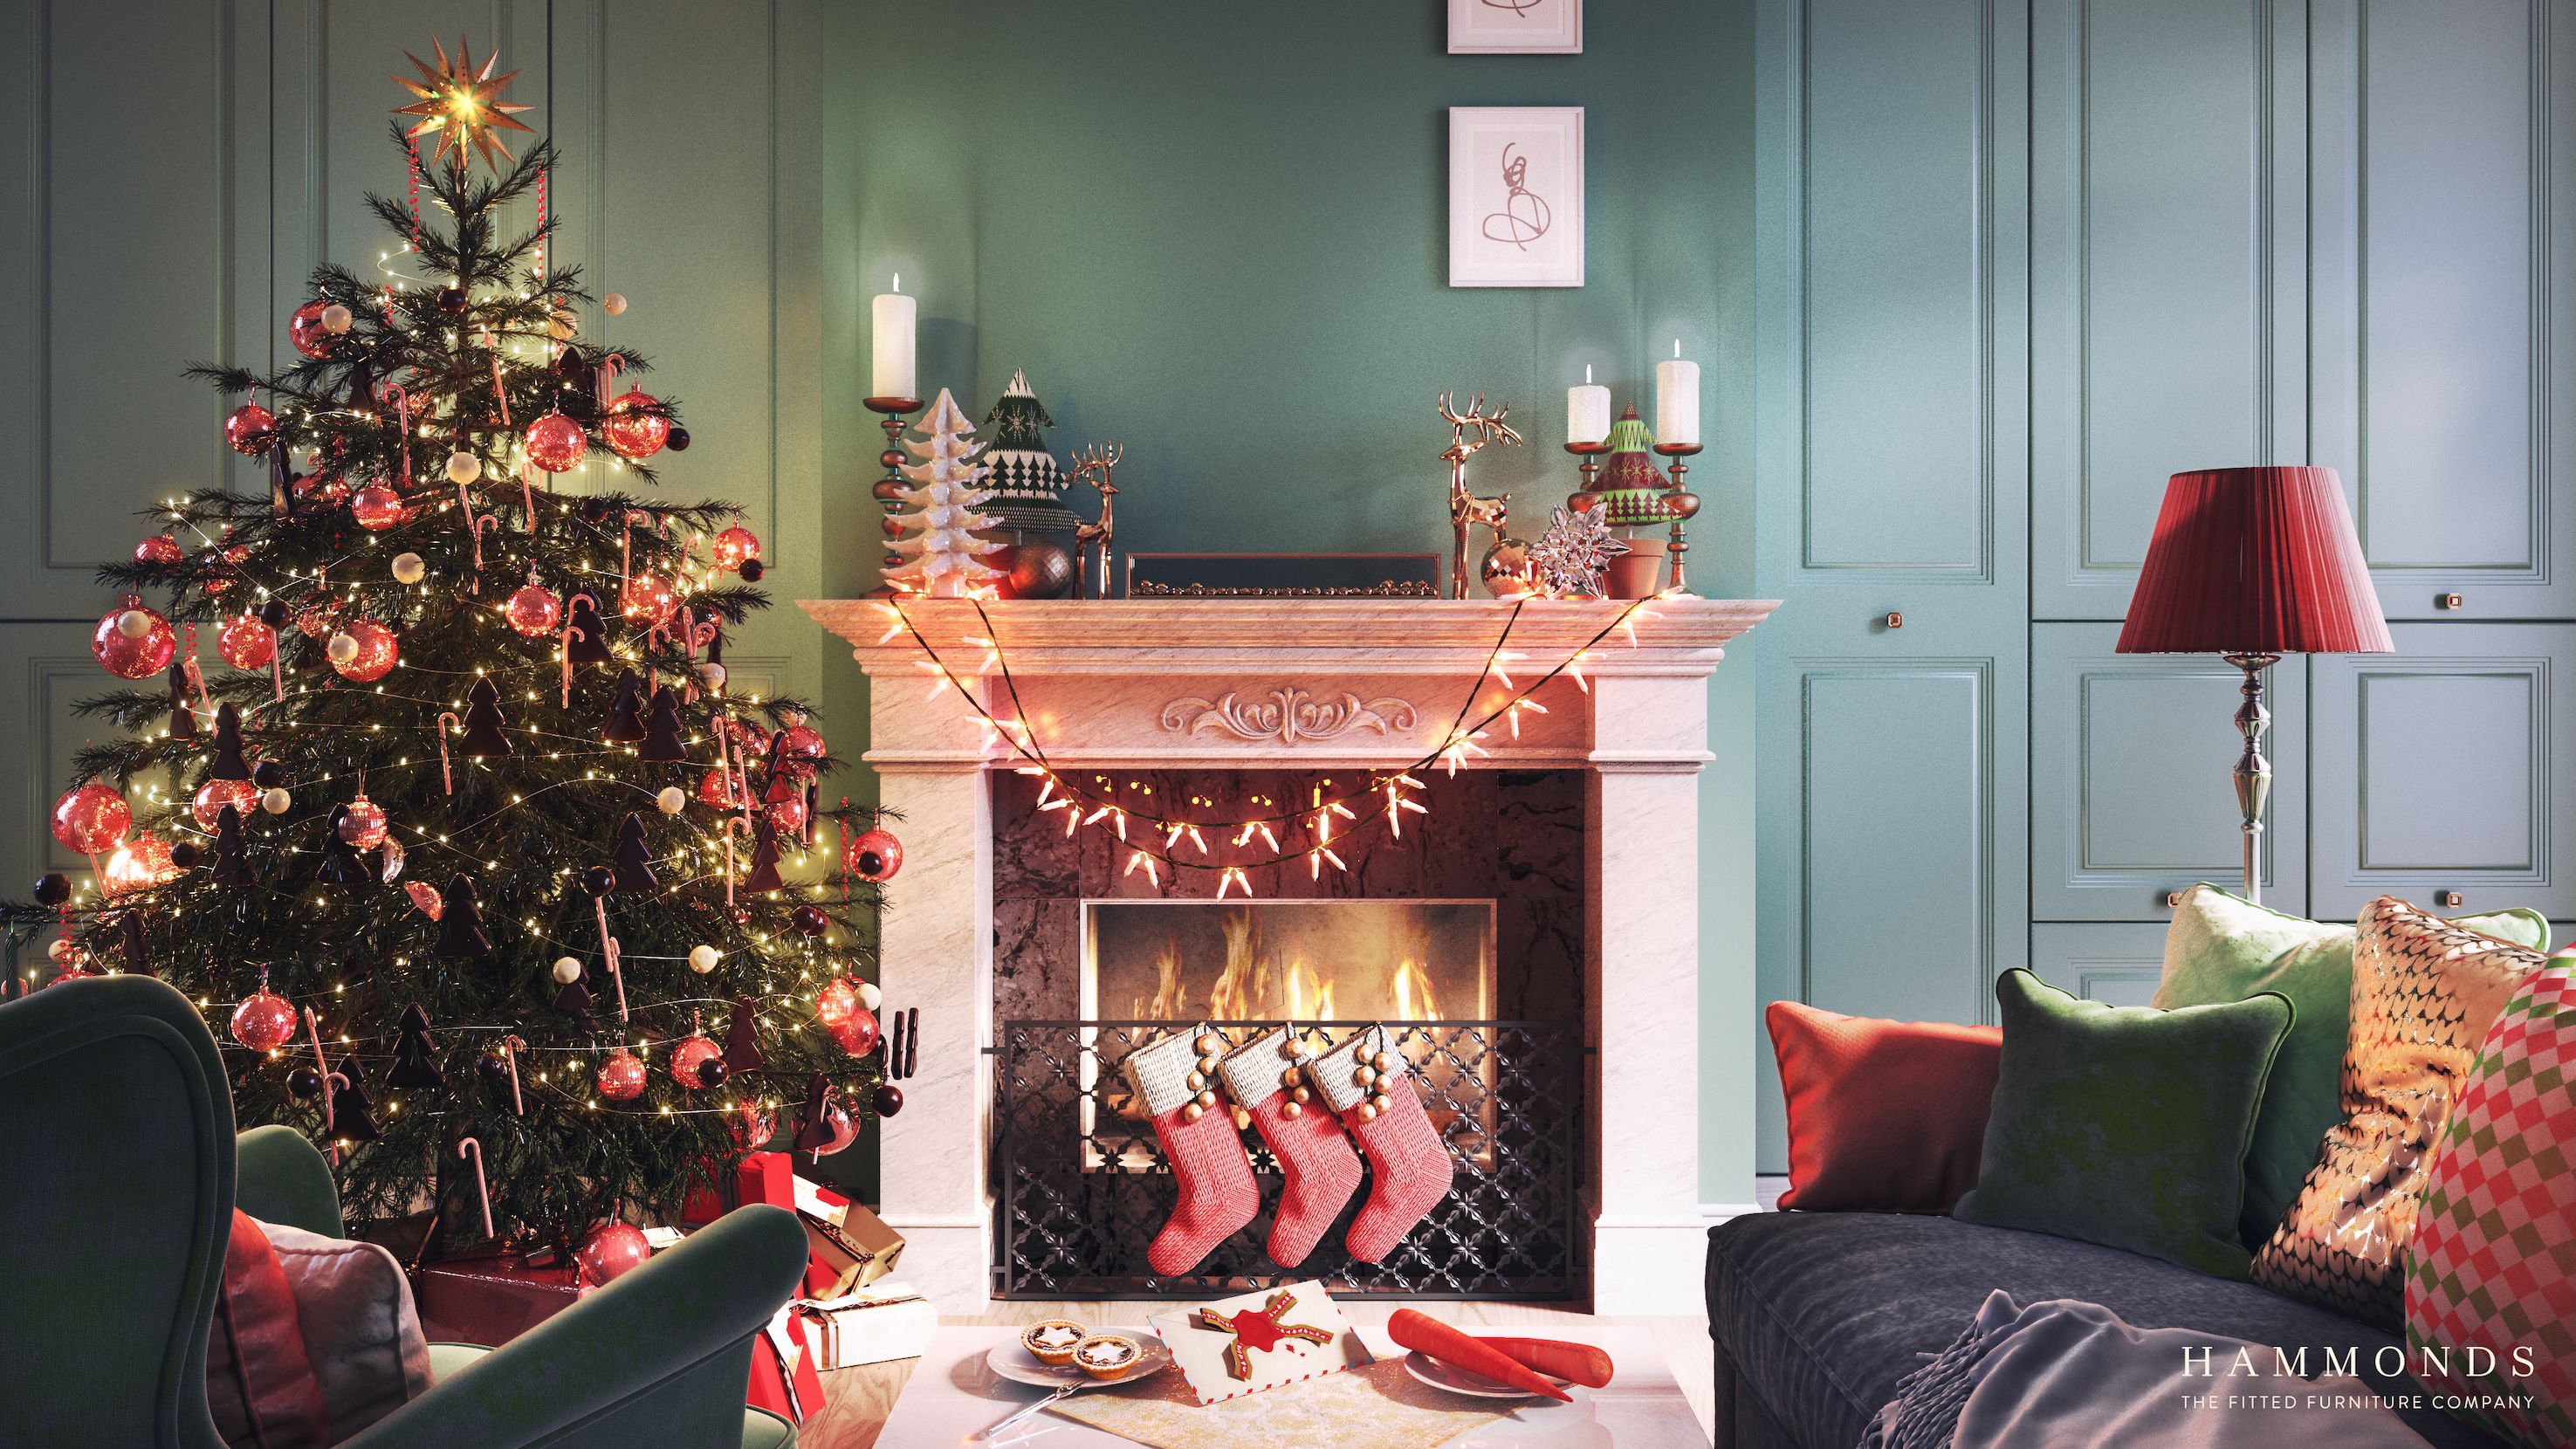 6 Christmas Living Room Decorations From Around The World